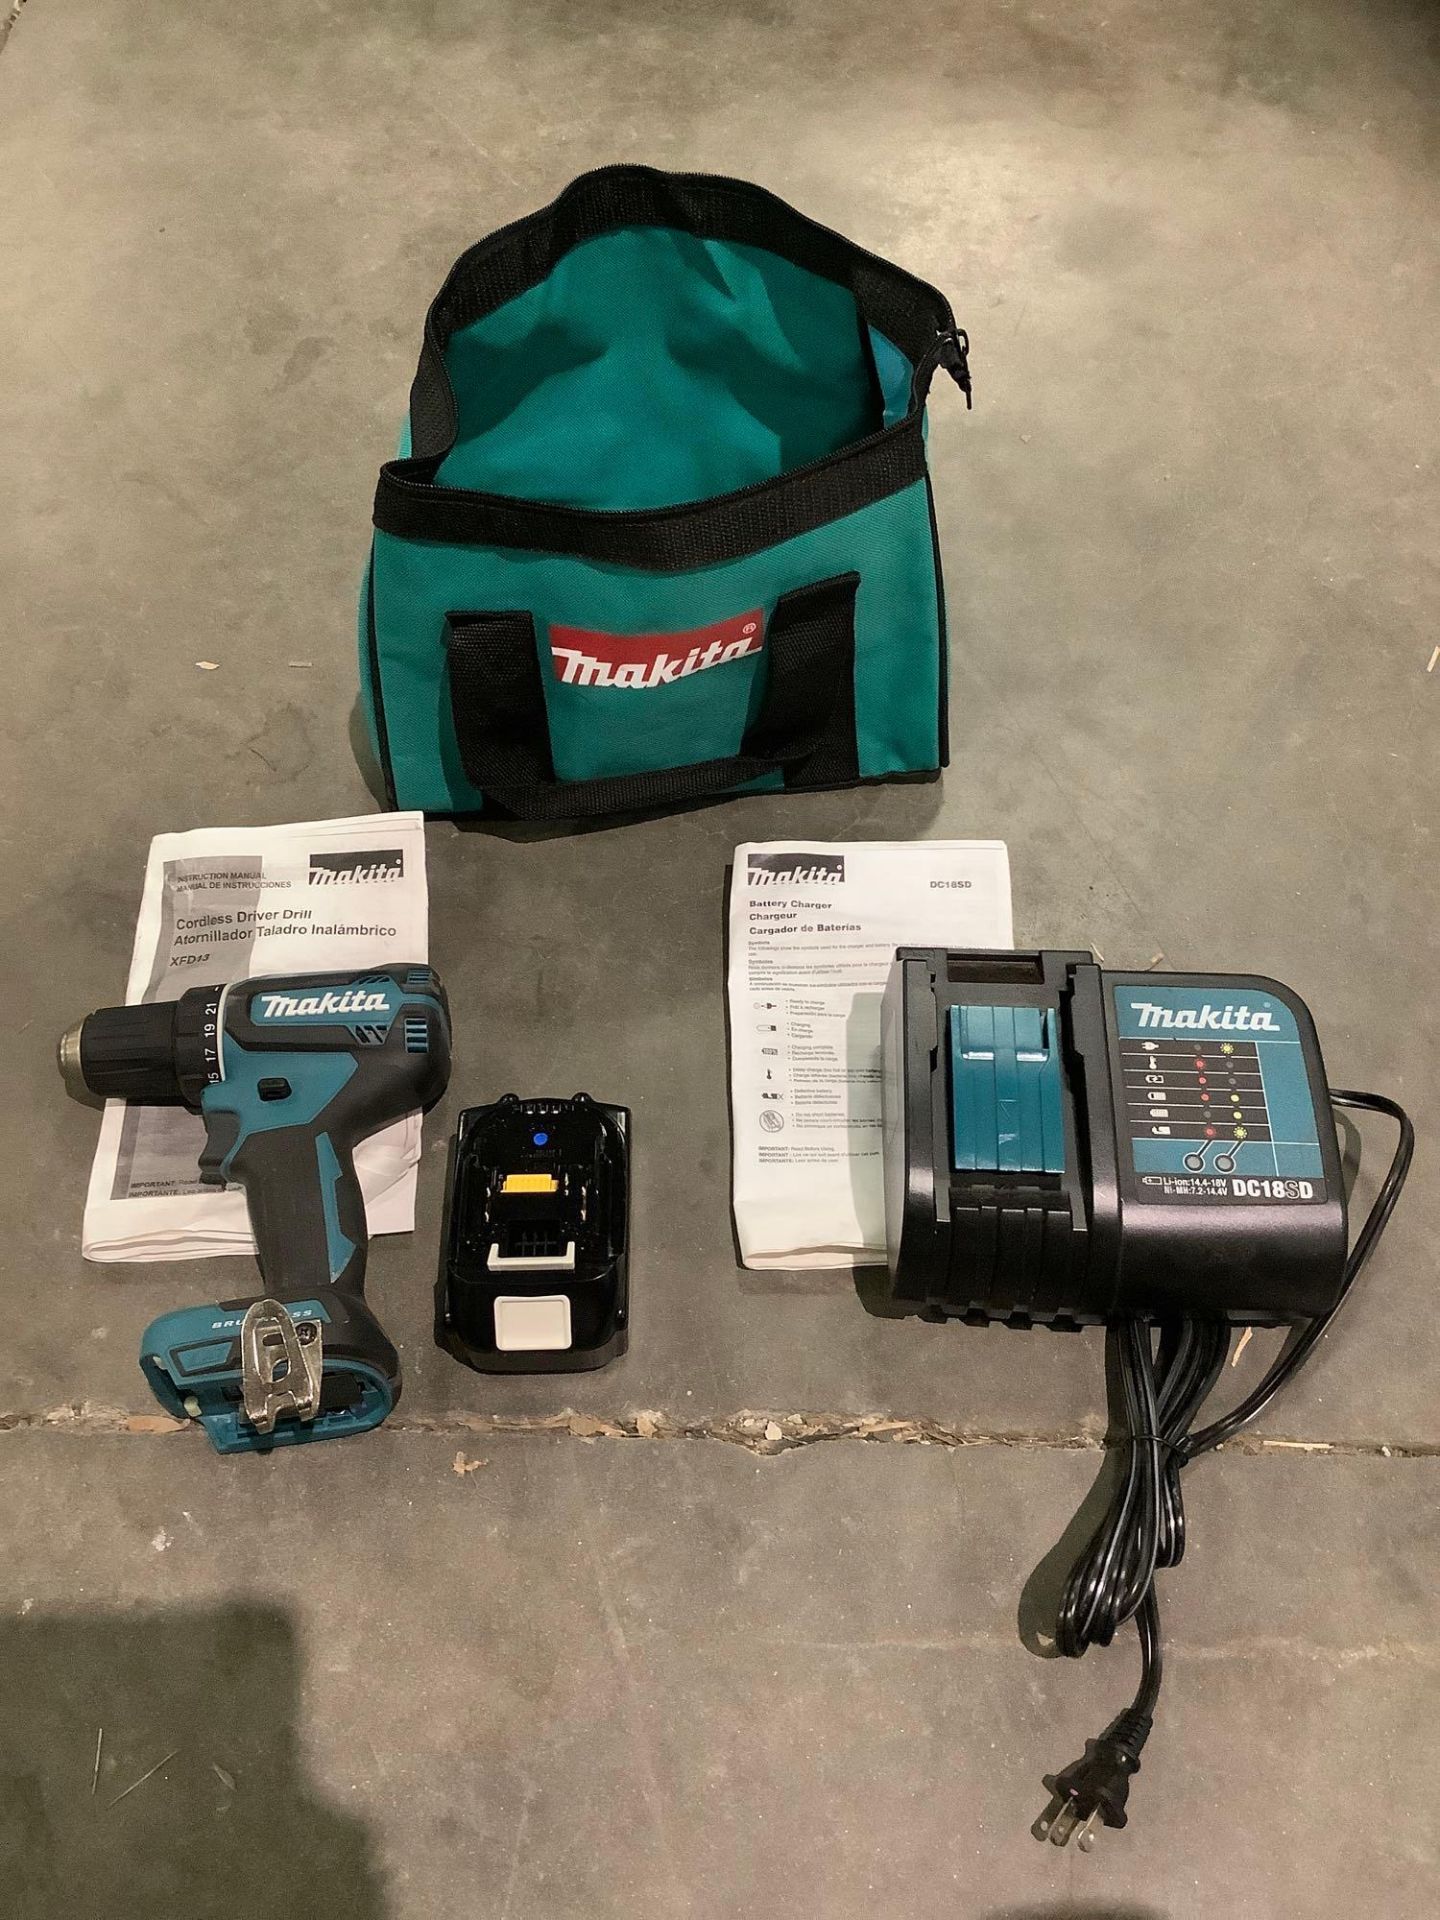 ( 1 )MAKITA BRUSHLESS CORDLESS DRIVER DRILL MODEL XFD13, RECONDITION , ( 1 ) 18V LITHIUM ION BATTERY